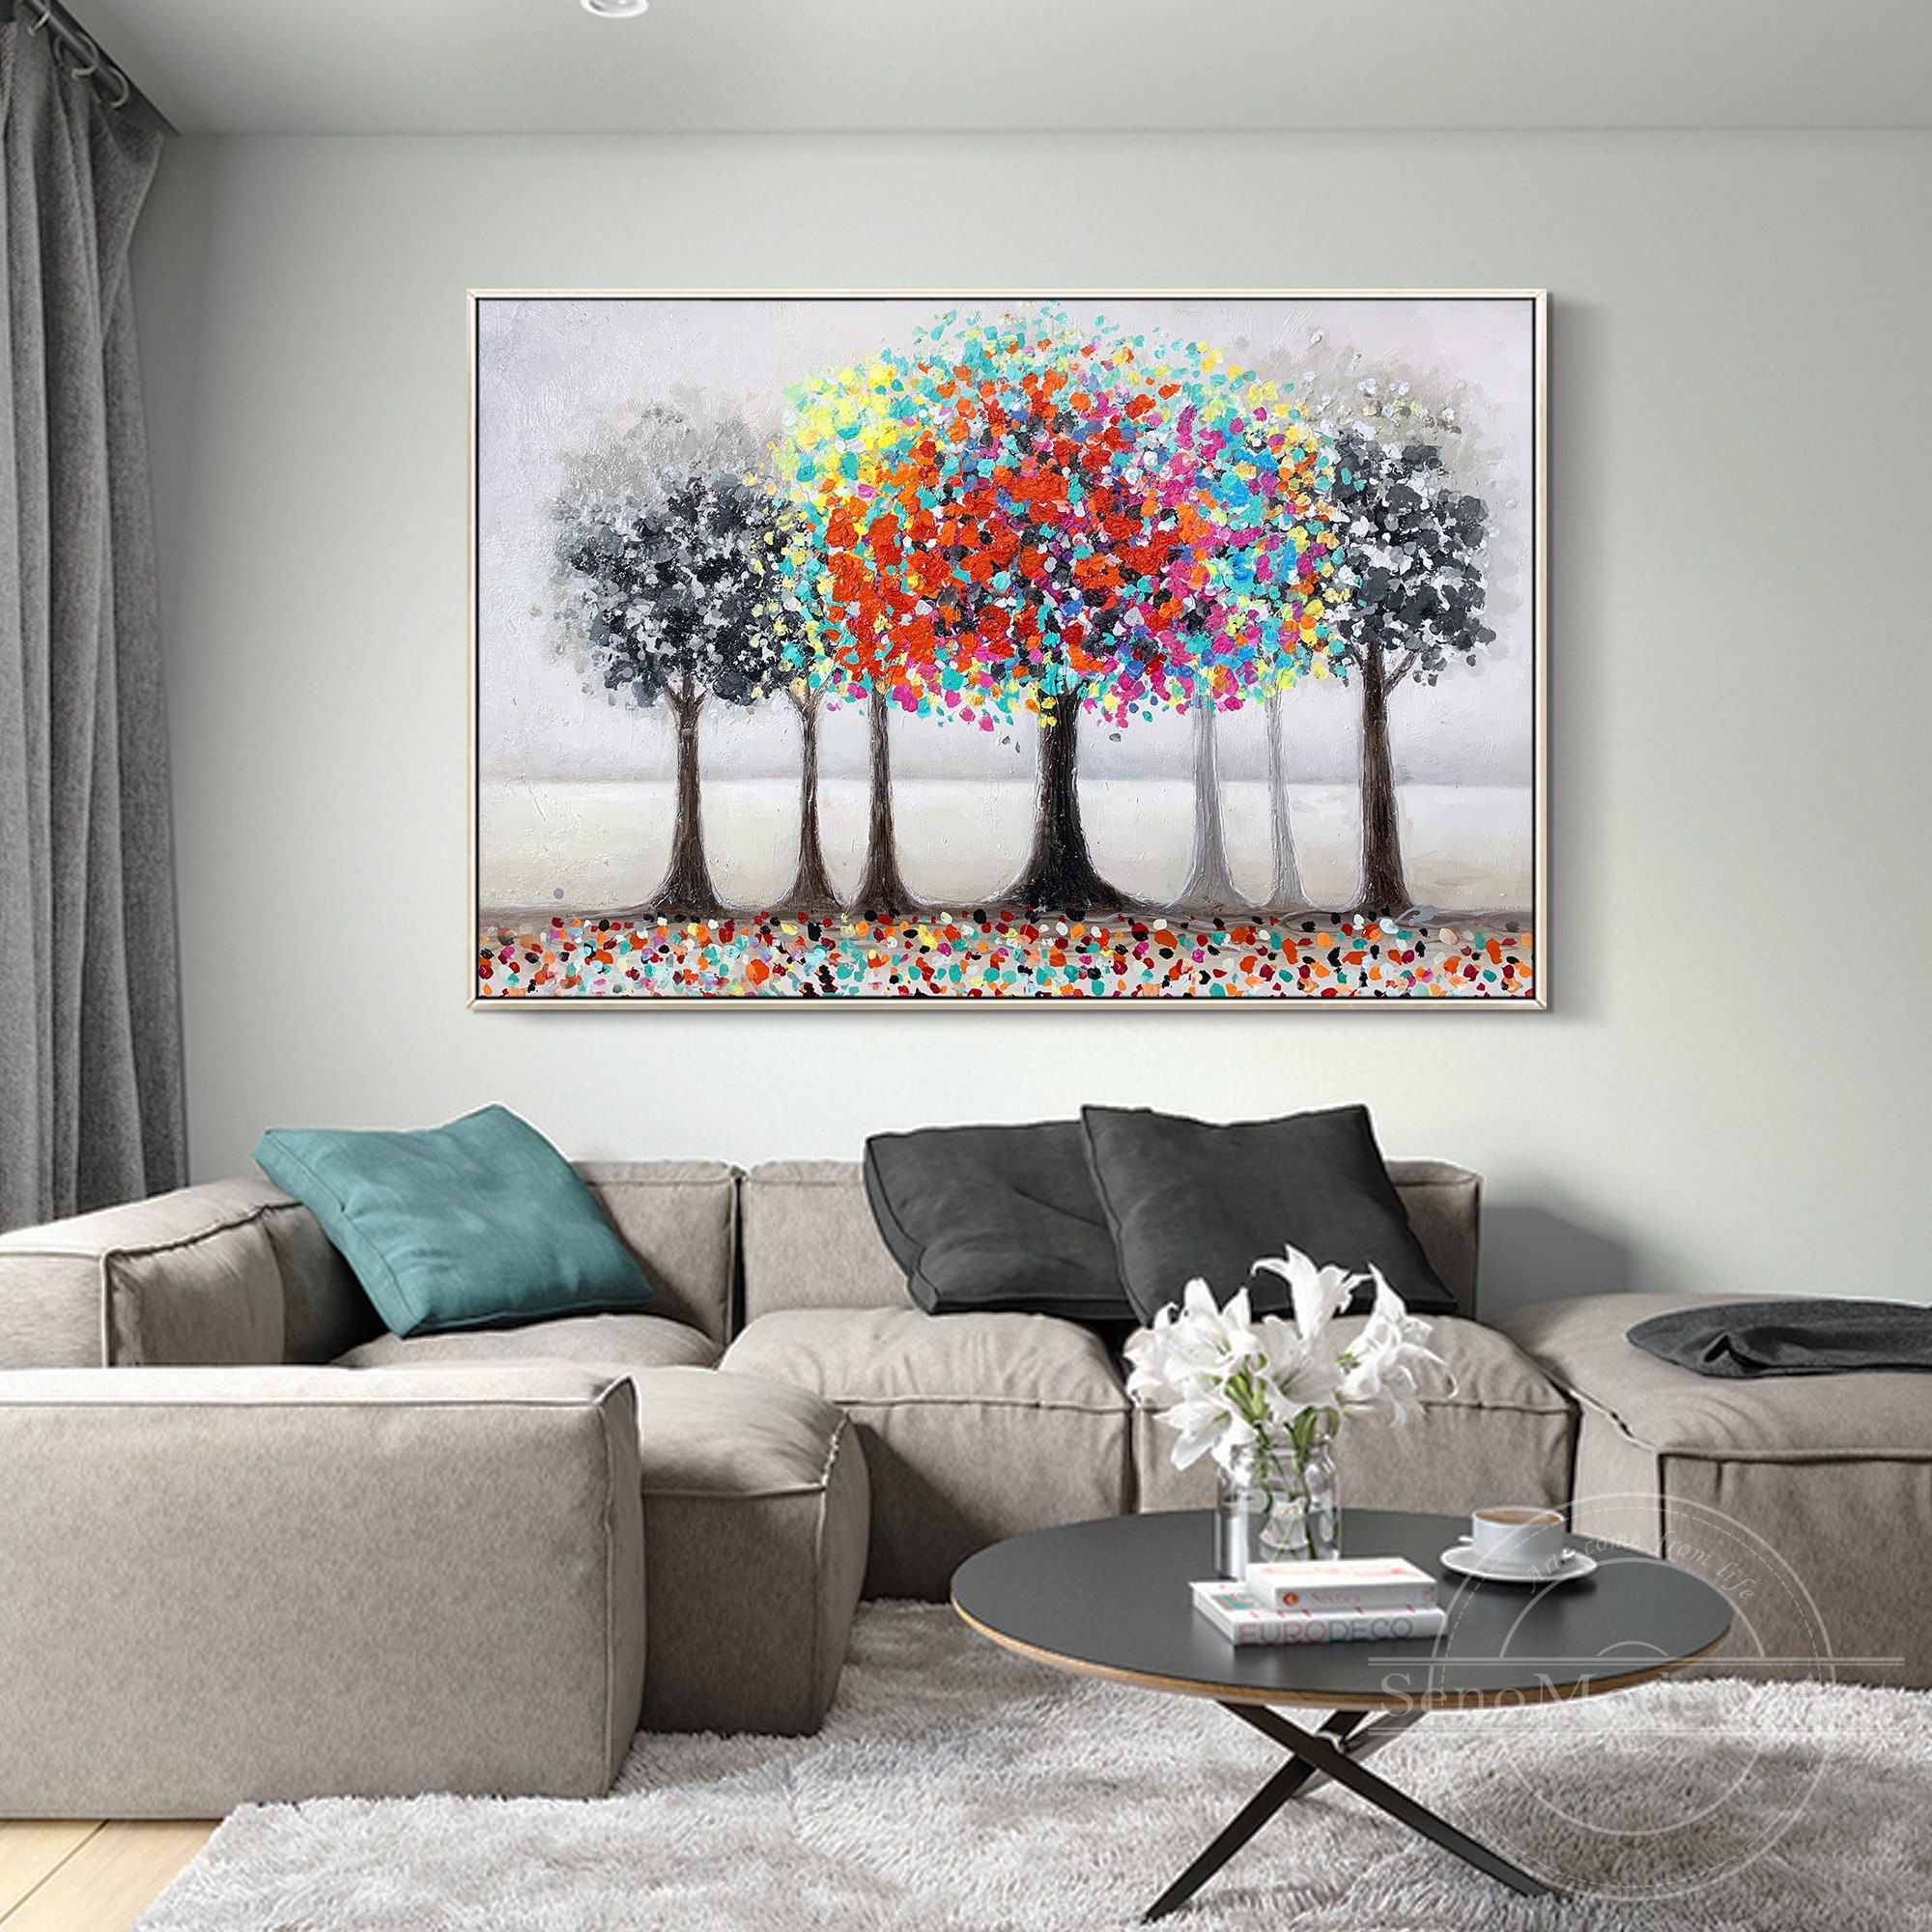 Colorful Tree Original Oil Painting Black and White Modern | Etsy